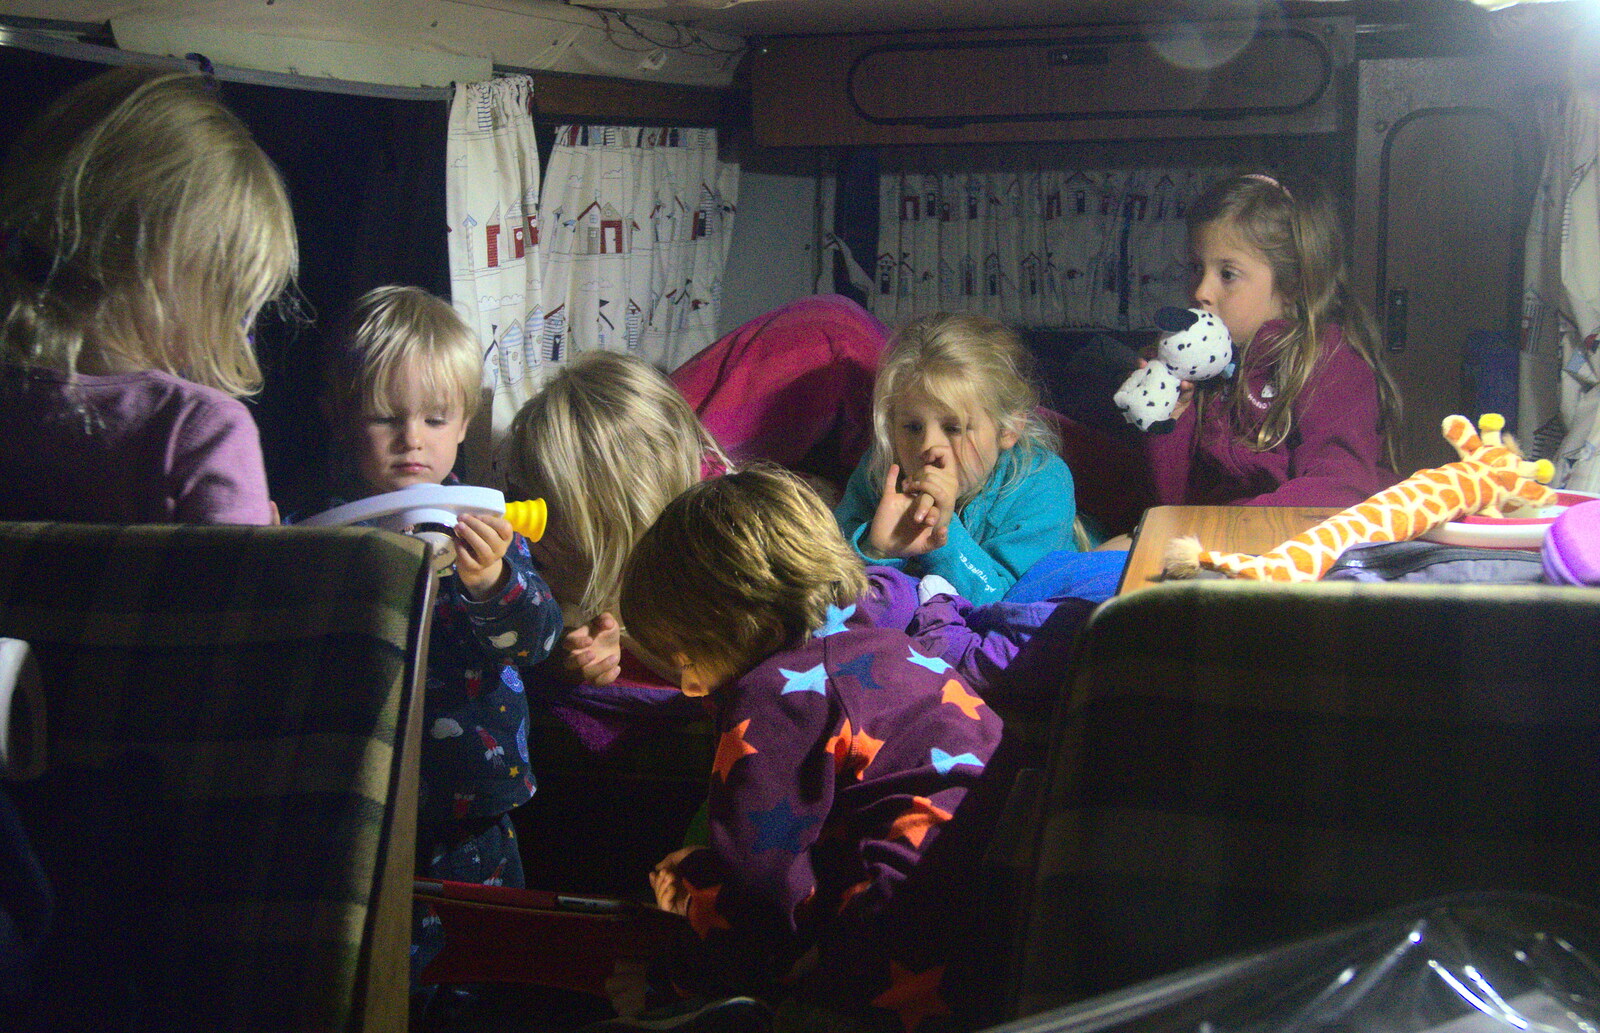 A whole scrum of kids in Chris and Megan's van from A Wet Weekend of Camping, Waxham Sands, Norfolk - 13th June 2015